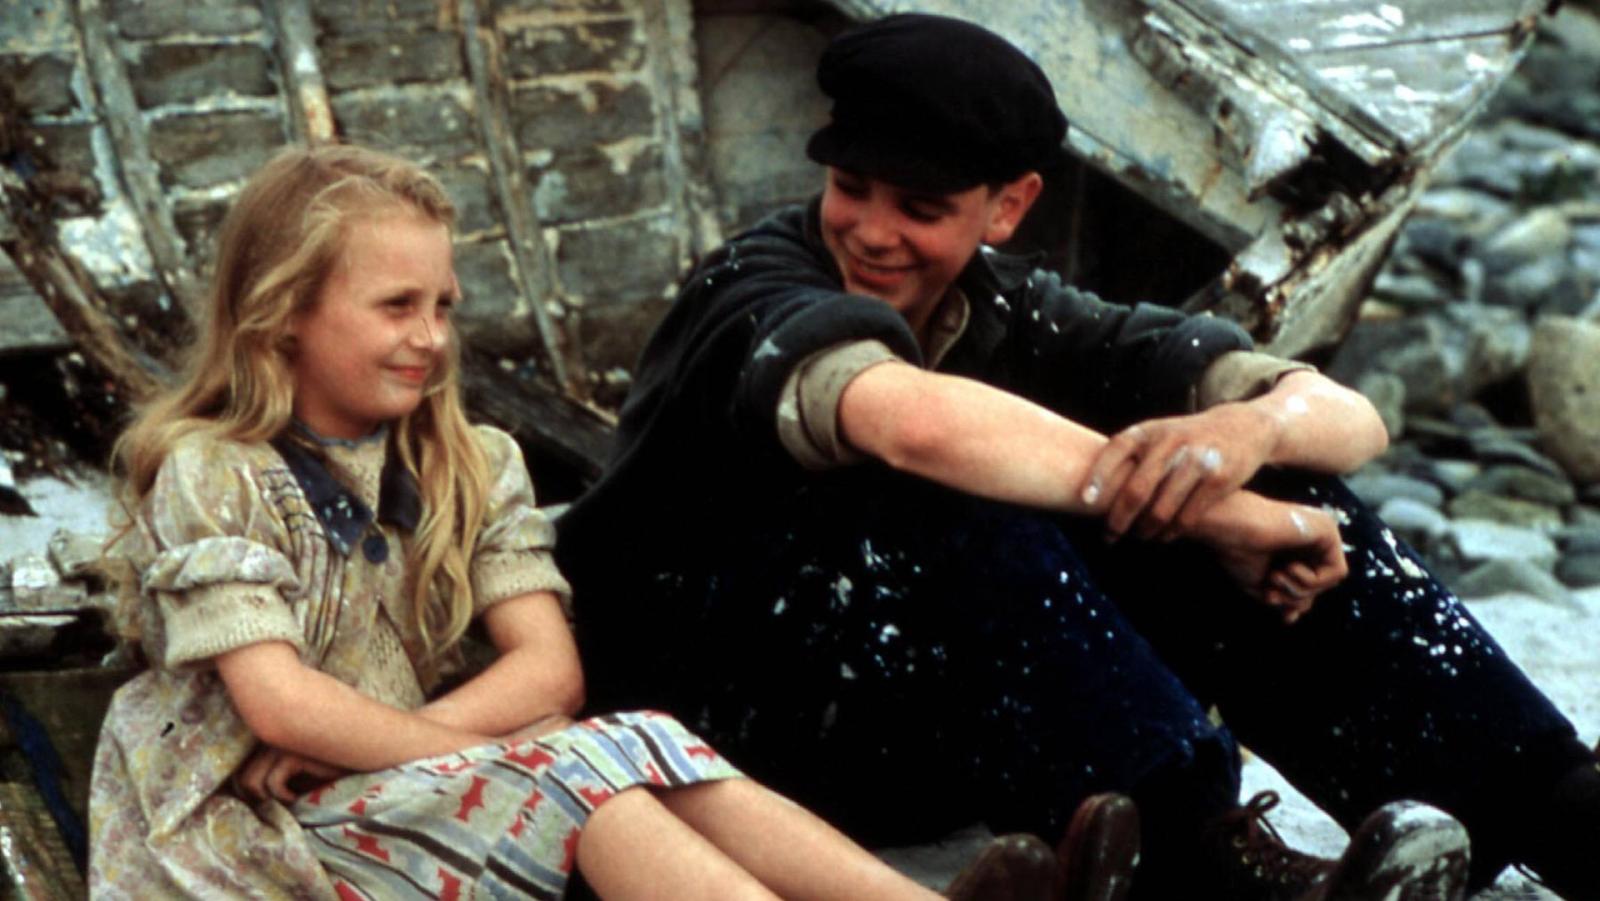 15 Lesser-Known Family Movies That Will Warm Your Heart - image 10